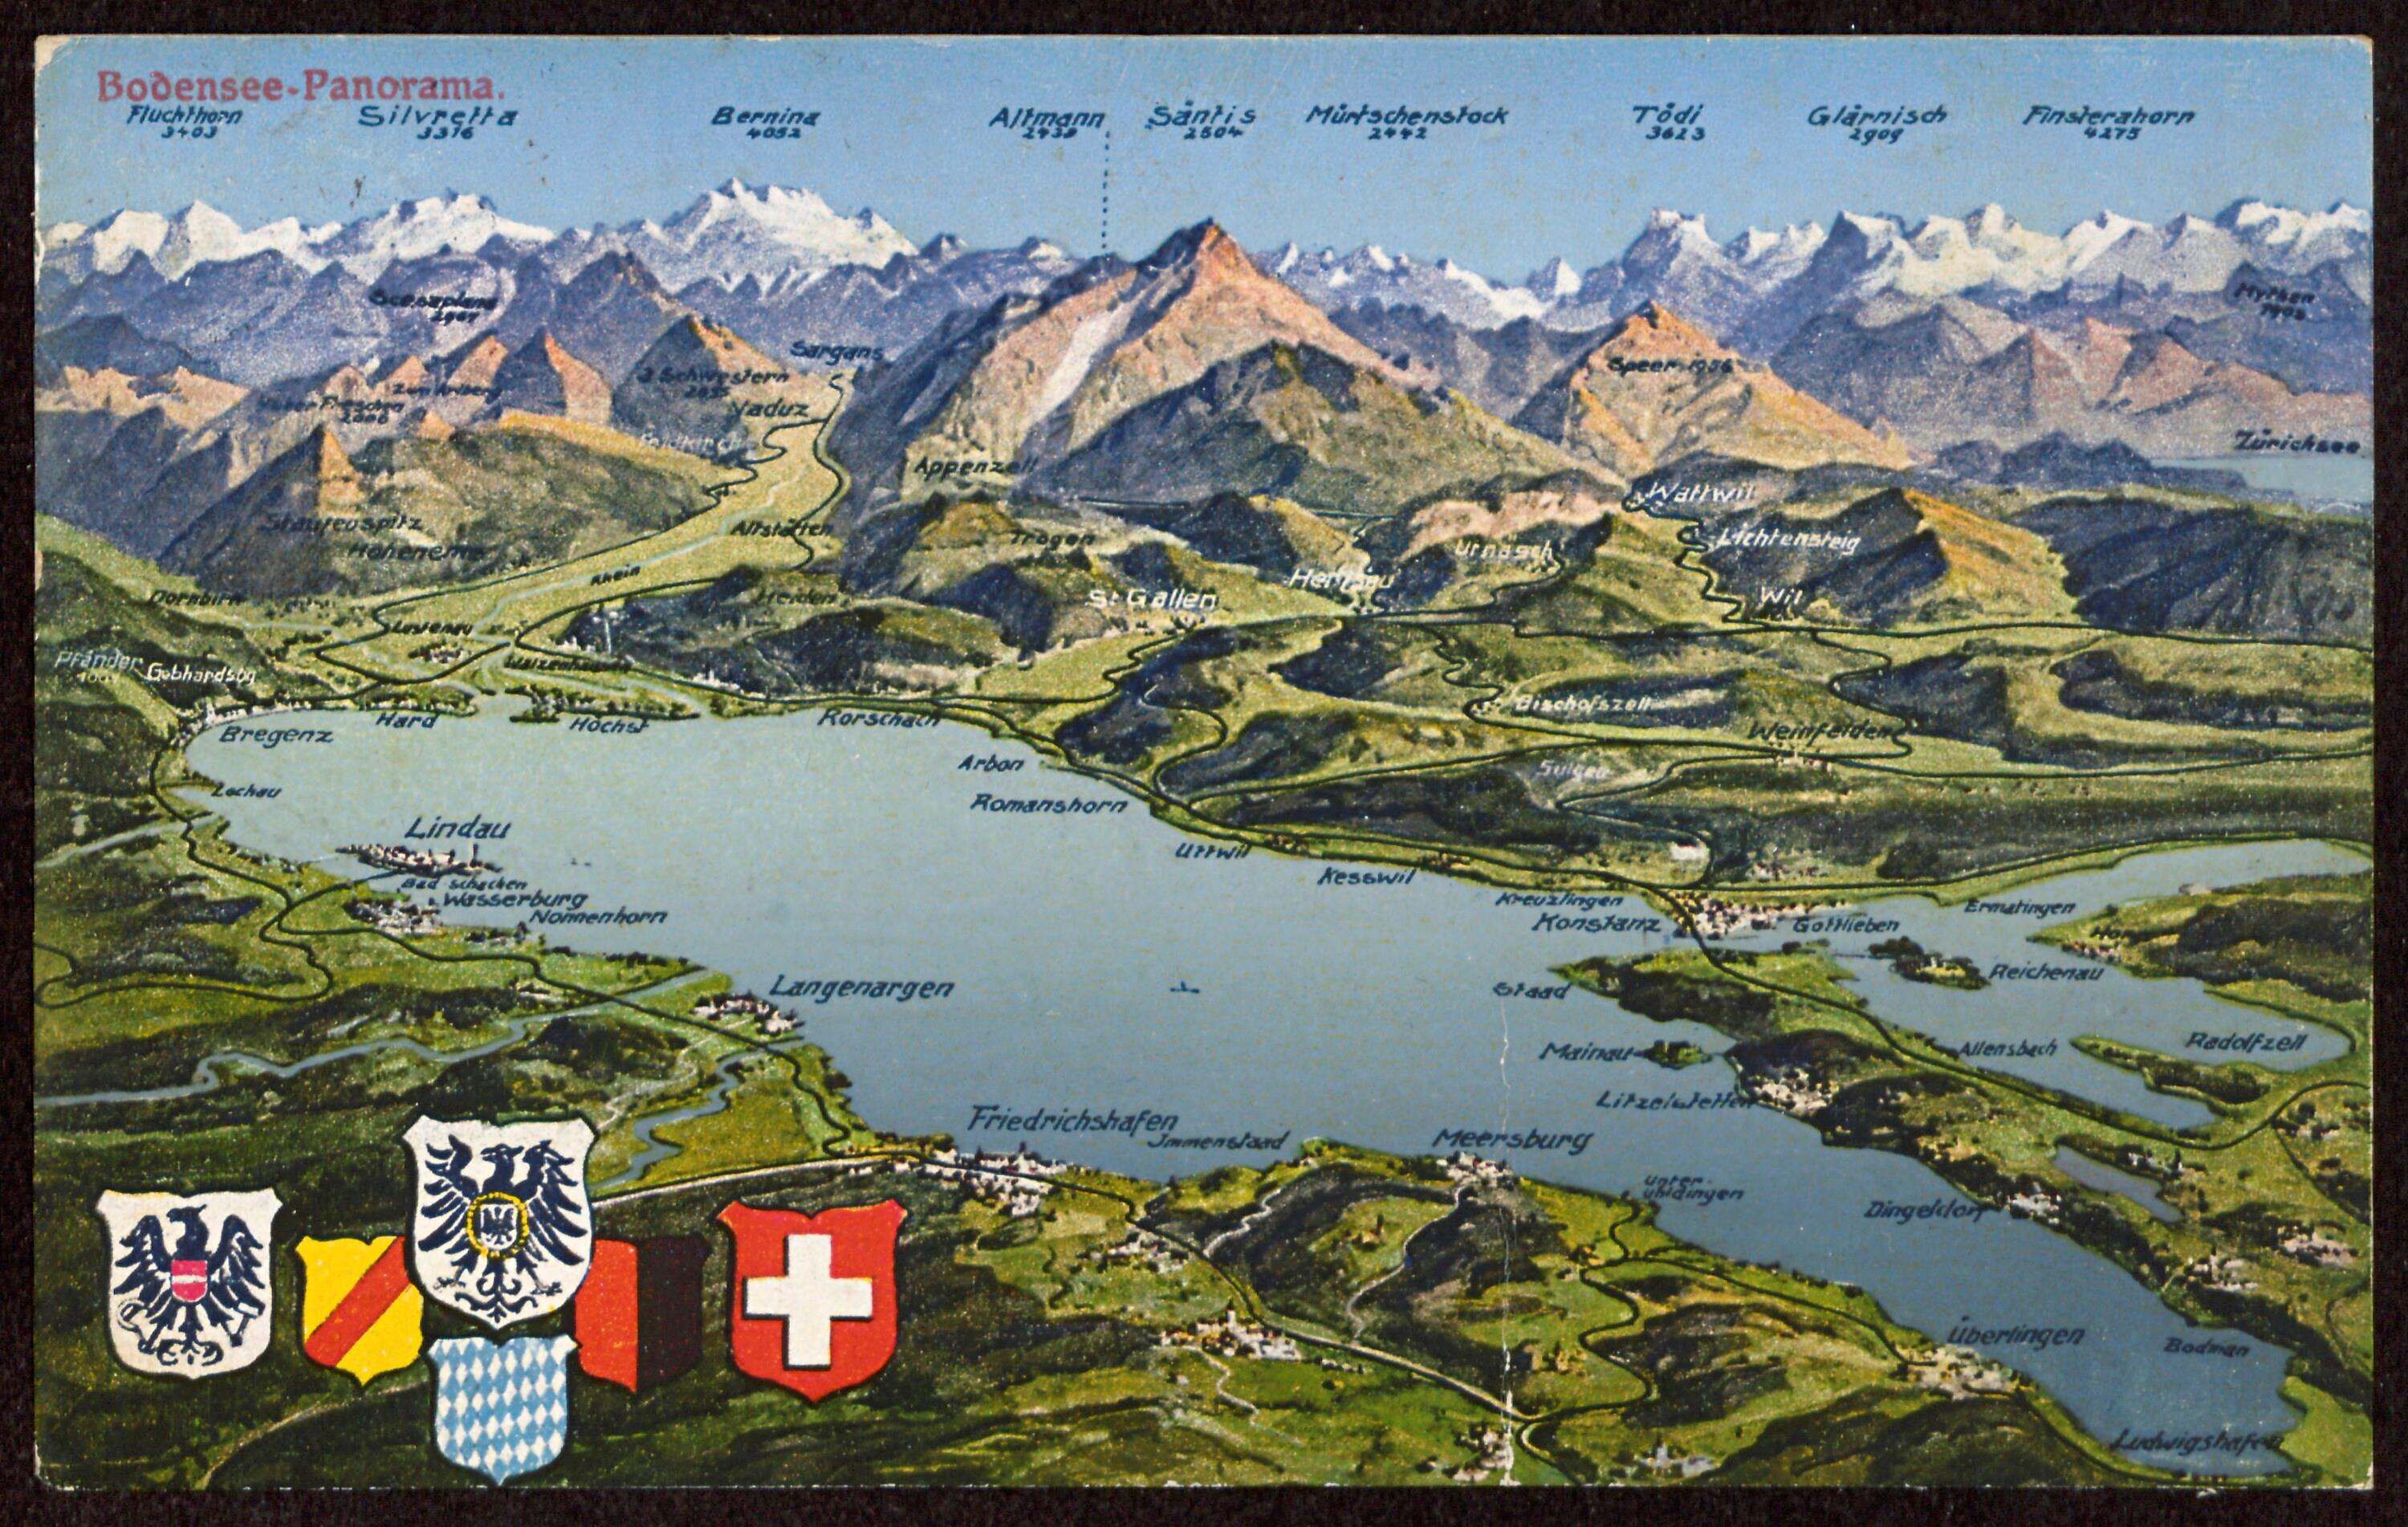 Bodensee-Panorama></div>


    <hr>
    <div class=